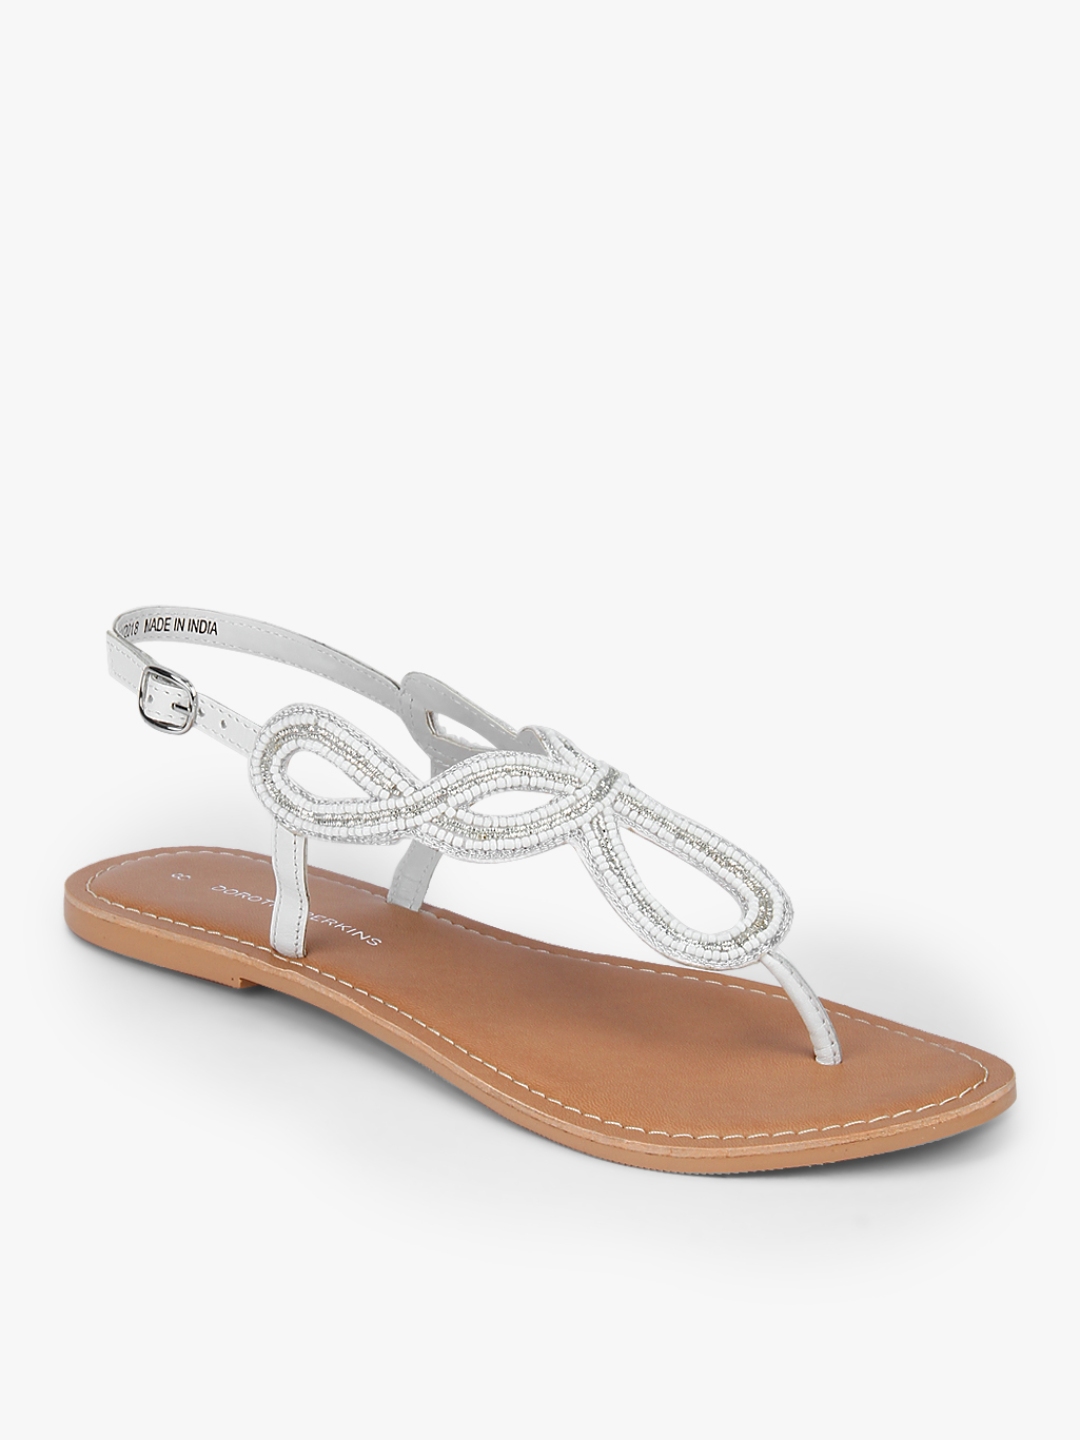 Buy White Solid T Strap Flats - Flats for Women 7943875 | Myntra